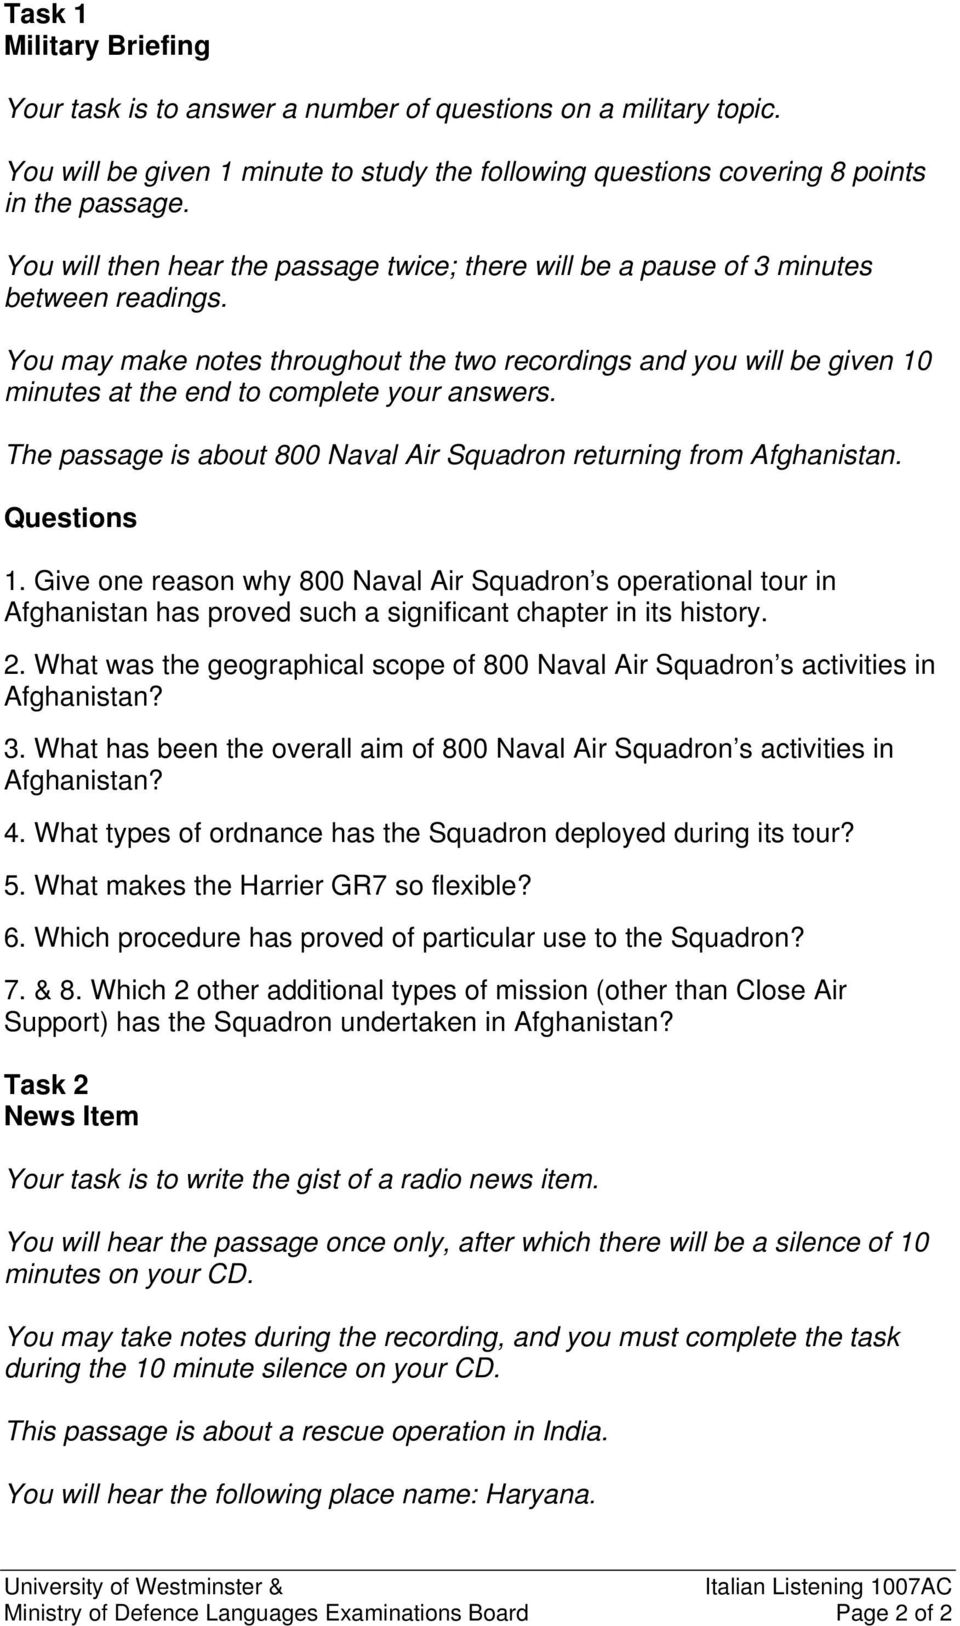 You may make notes throughout the two recordings and you will be given 10 minutes at the end to complete your answers. The passage is about 800 Naval Air Squadron returning from Afghanistan.